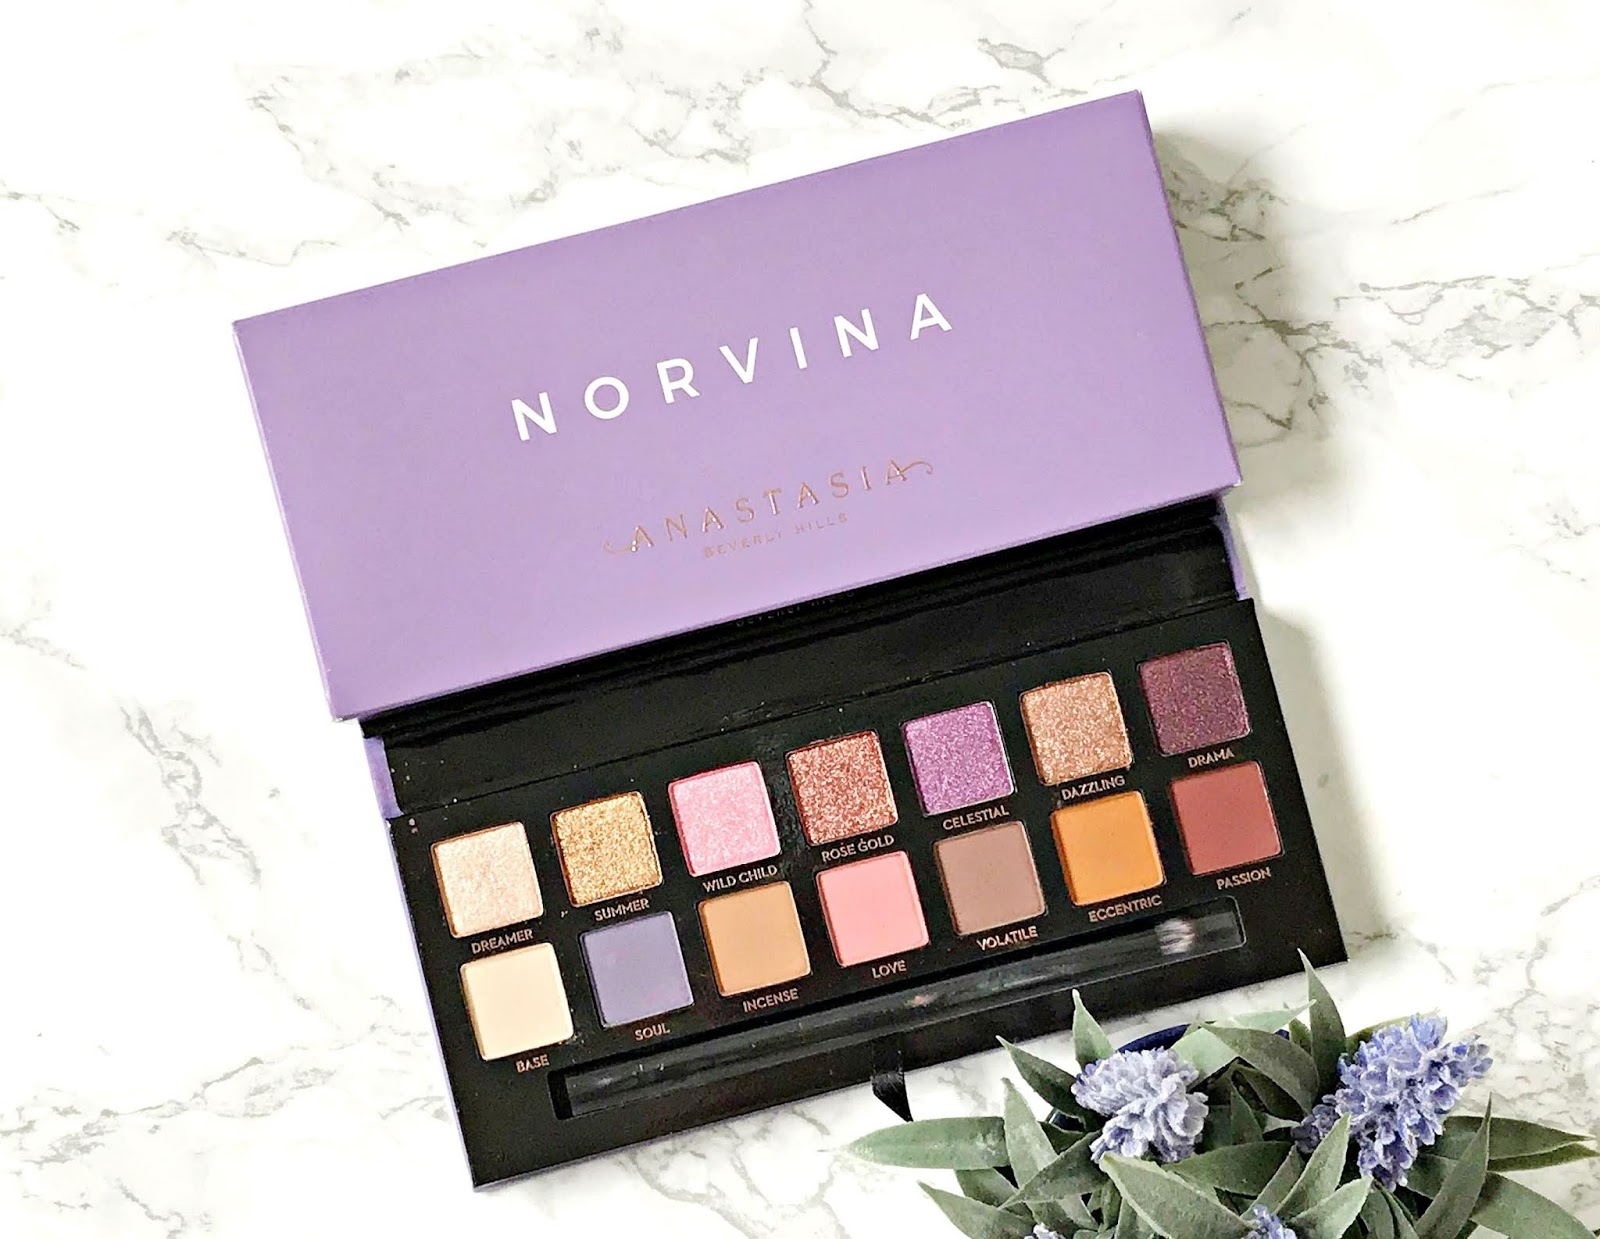 Anastasia Beverly Hills Norvina Palette Review, Swatches and Giveaway